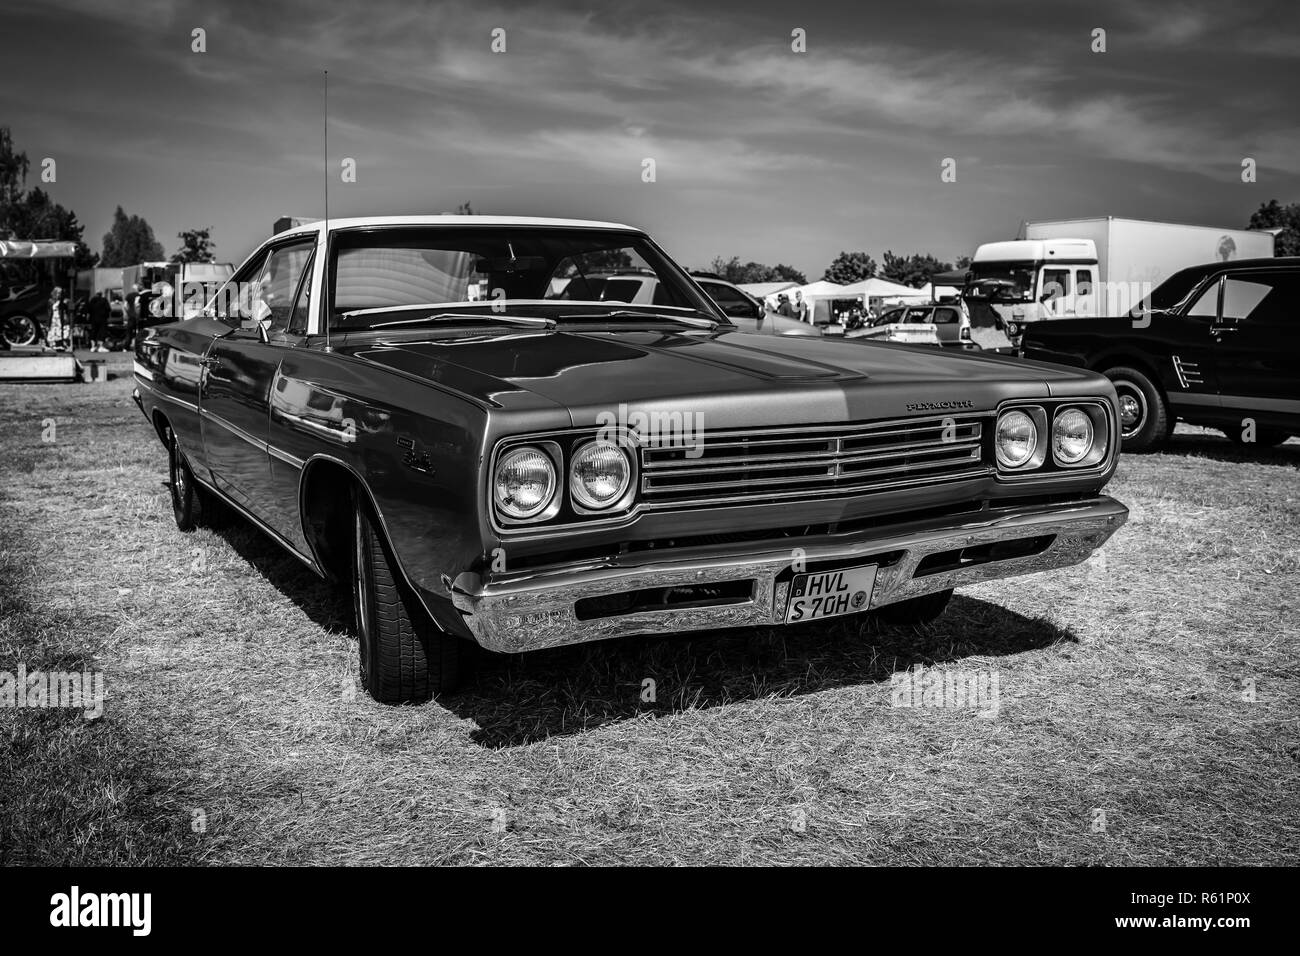 1968 plymouth satellite Black and White Stock Photos & Images - Alamy